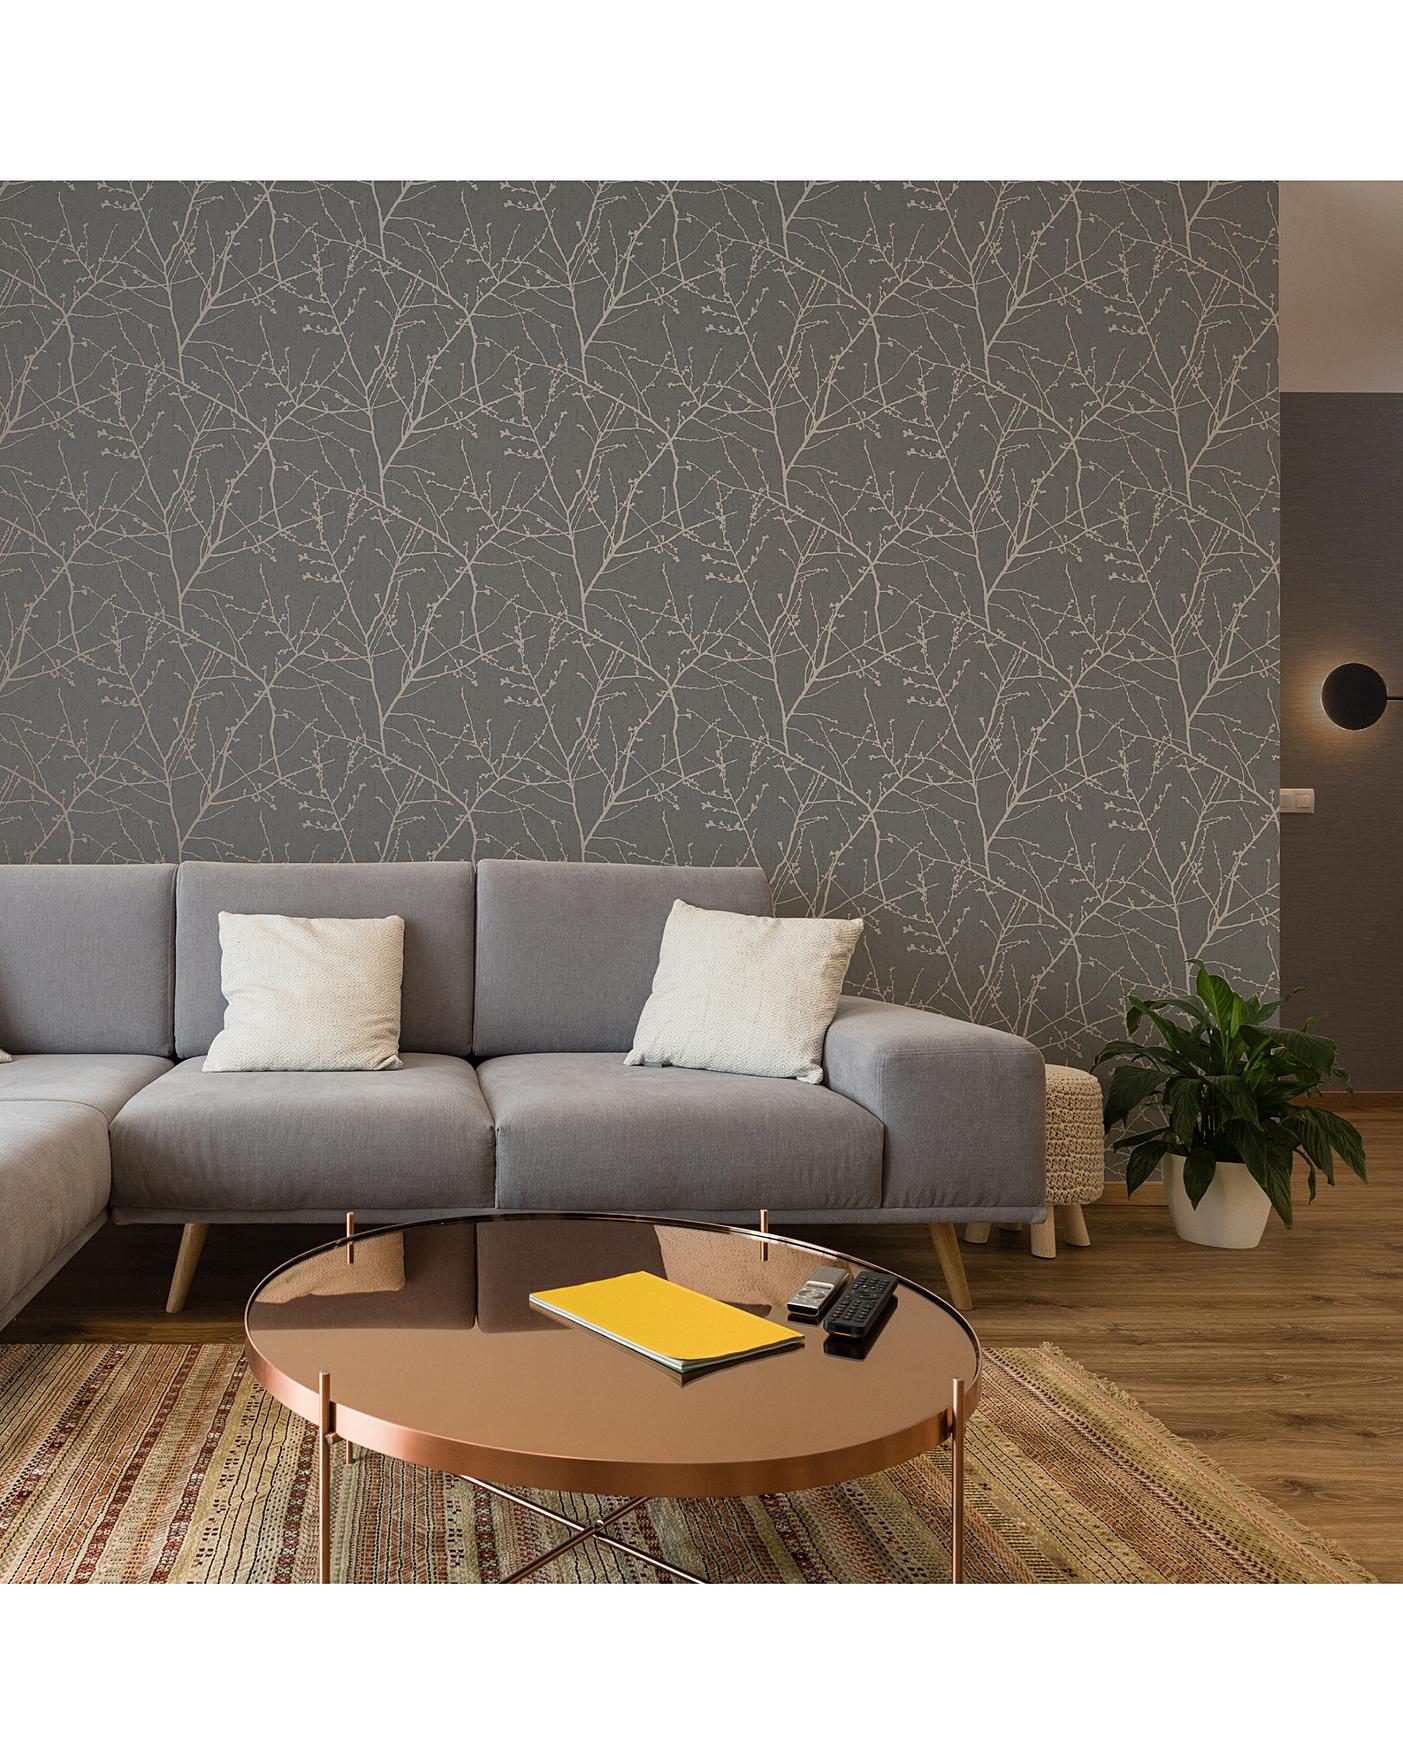 Winter Tree Metallic Wallpaper in Charcoal and Copper  Grey wallpaper  feature wall Metallic wallpaper Grey and gold wallpaper